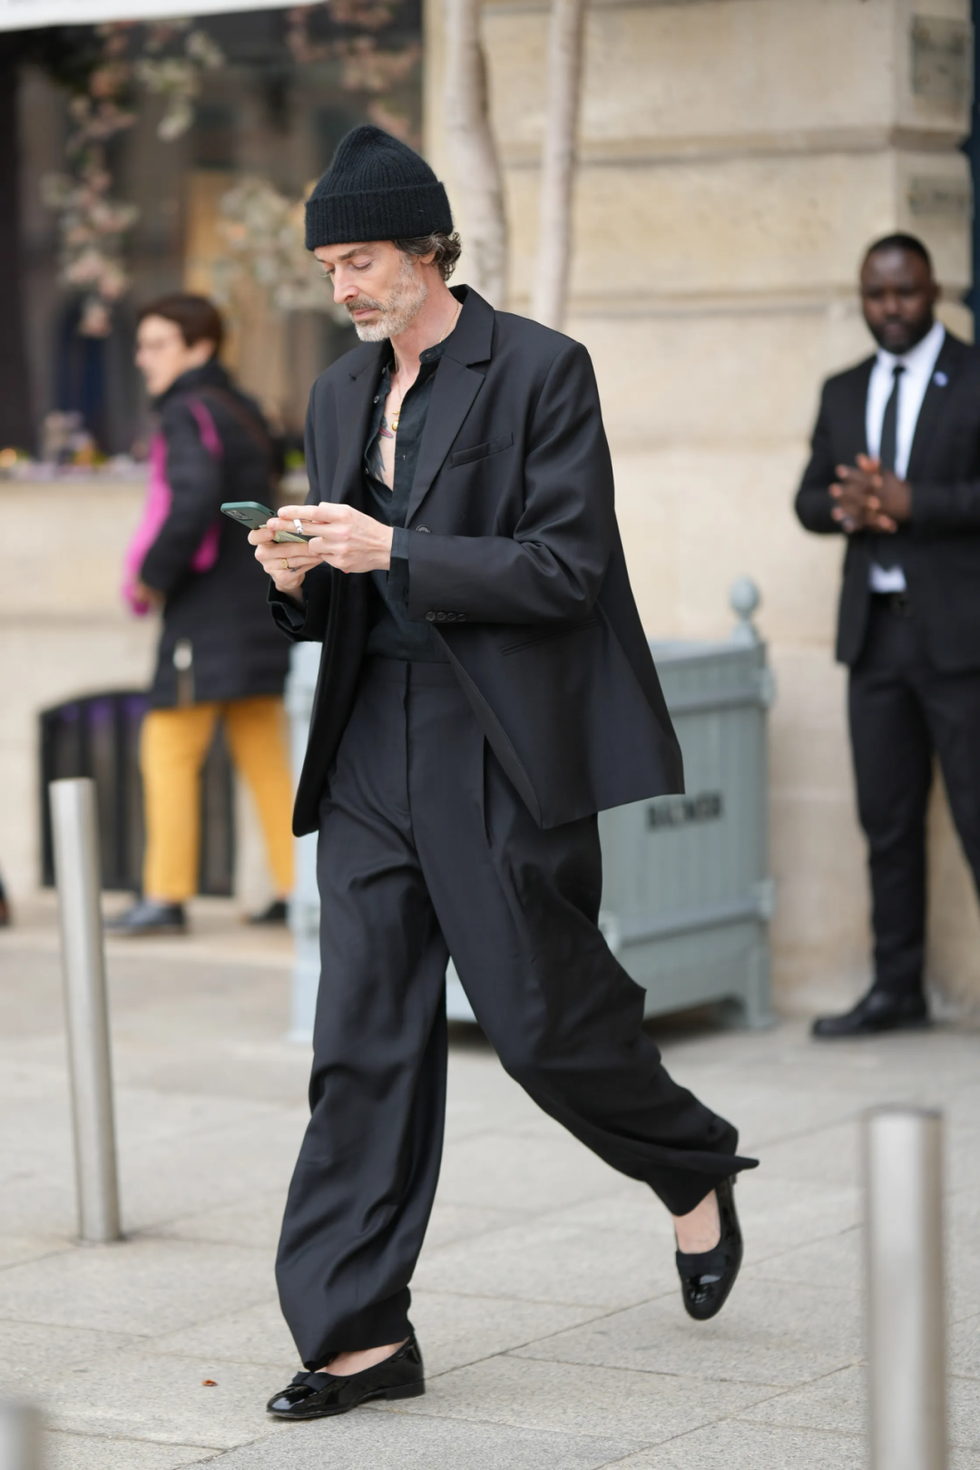 a person in a suit walking